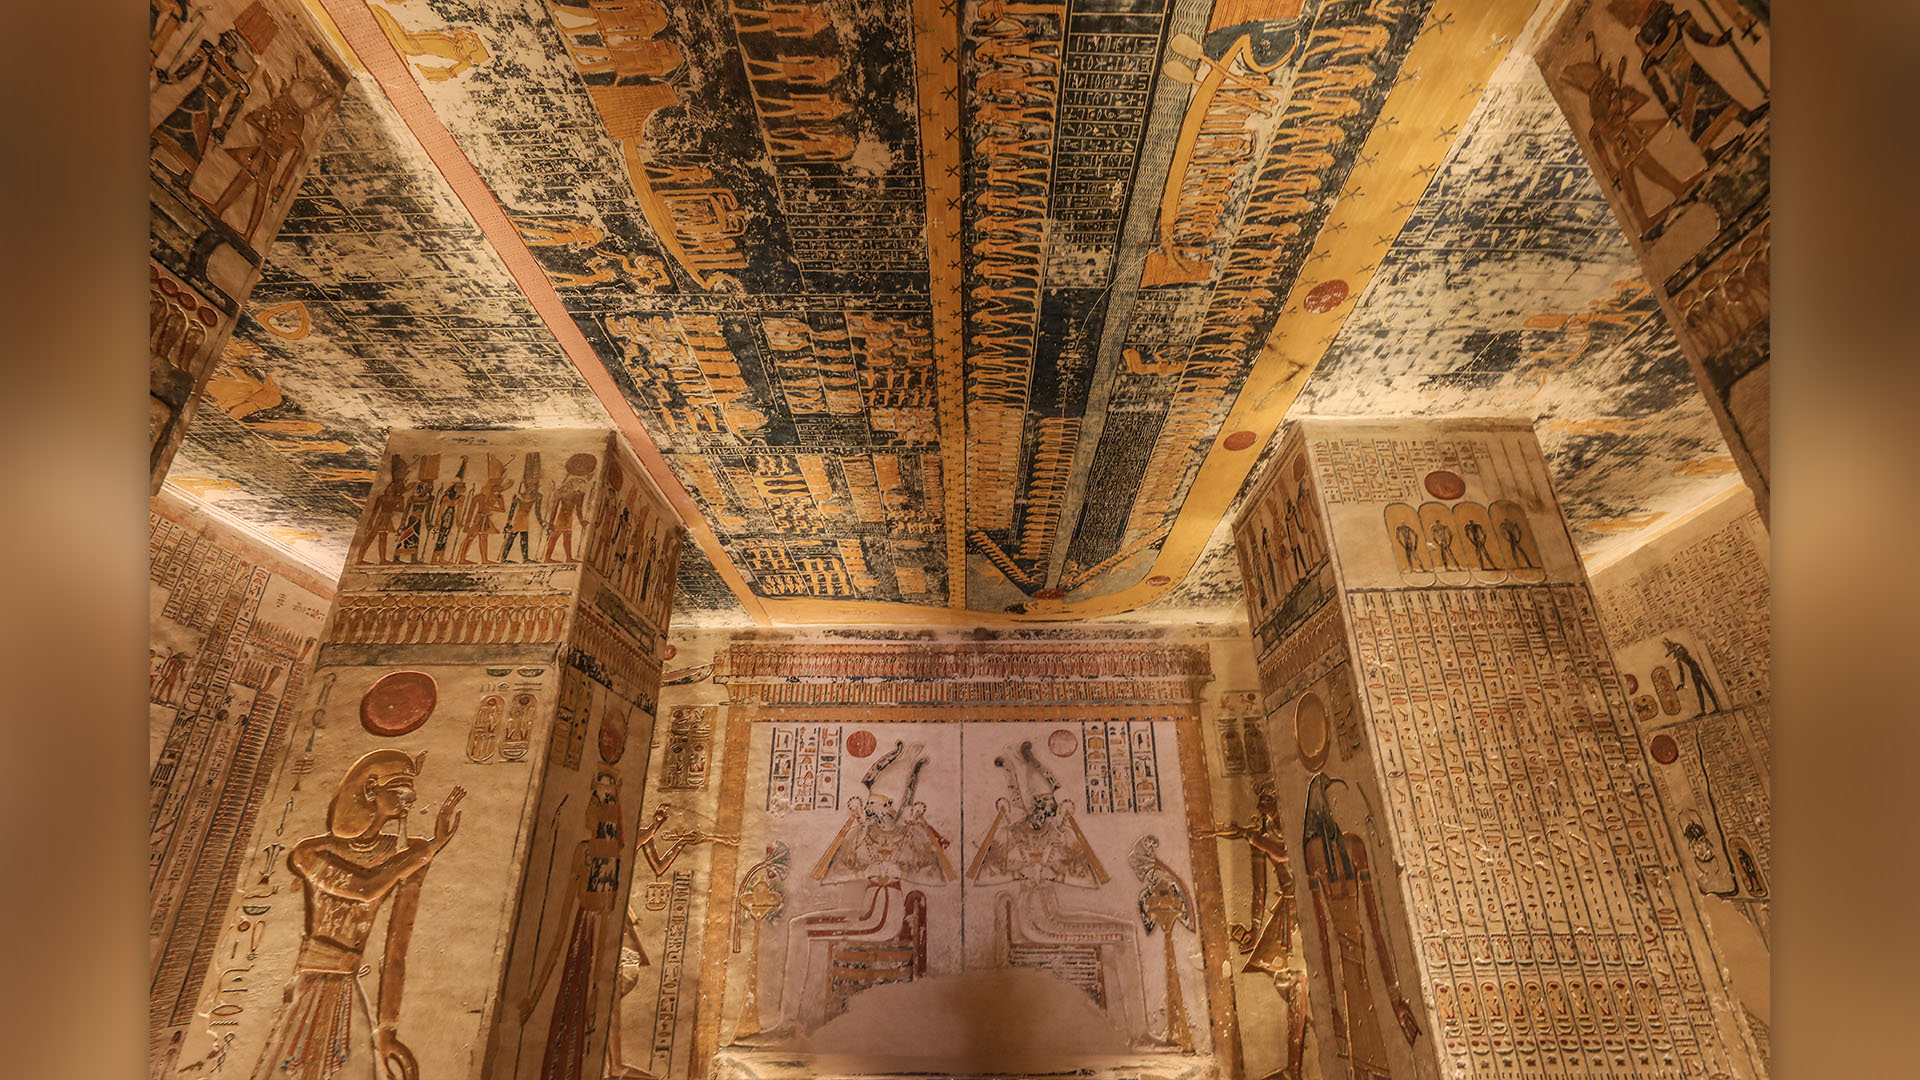 A view from the tombs of V. Ramesses, the fourth pharaoh of the Twentieth Dynasty of Egypt and VI. Ramesses, the fifth ruler of the Twentieth Dynasty of Egypt at Valley of the Kings located on the east bank of the Nile River in Luxor.